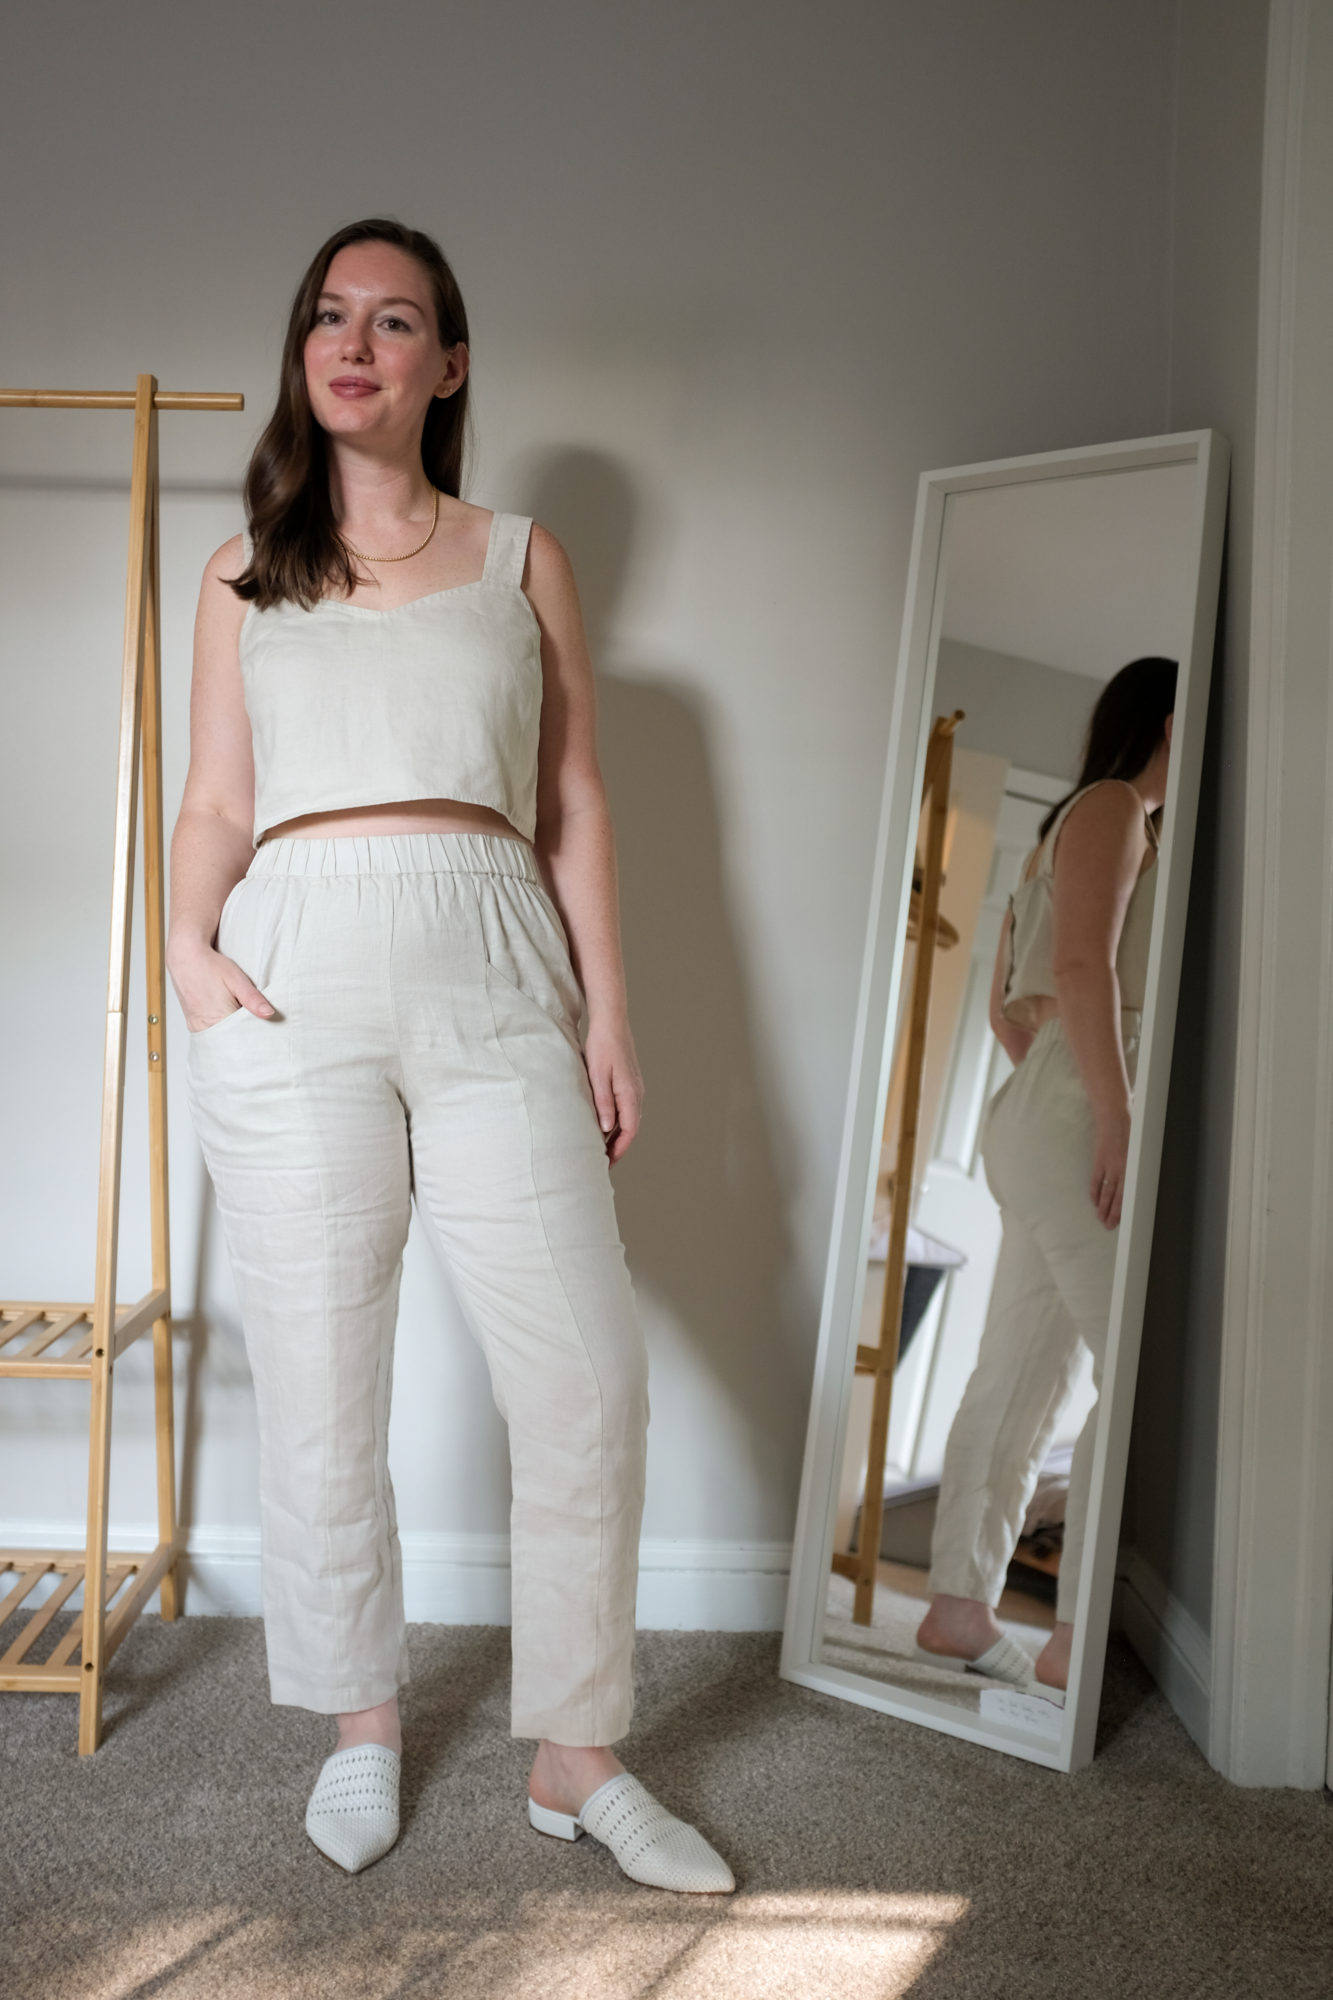 Sets Appeal: A Review of Almost Every Linen Top and Bottom from Quince